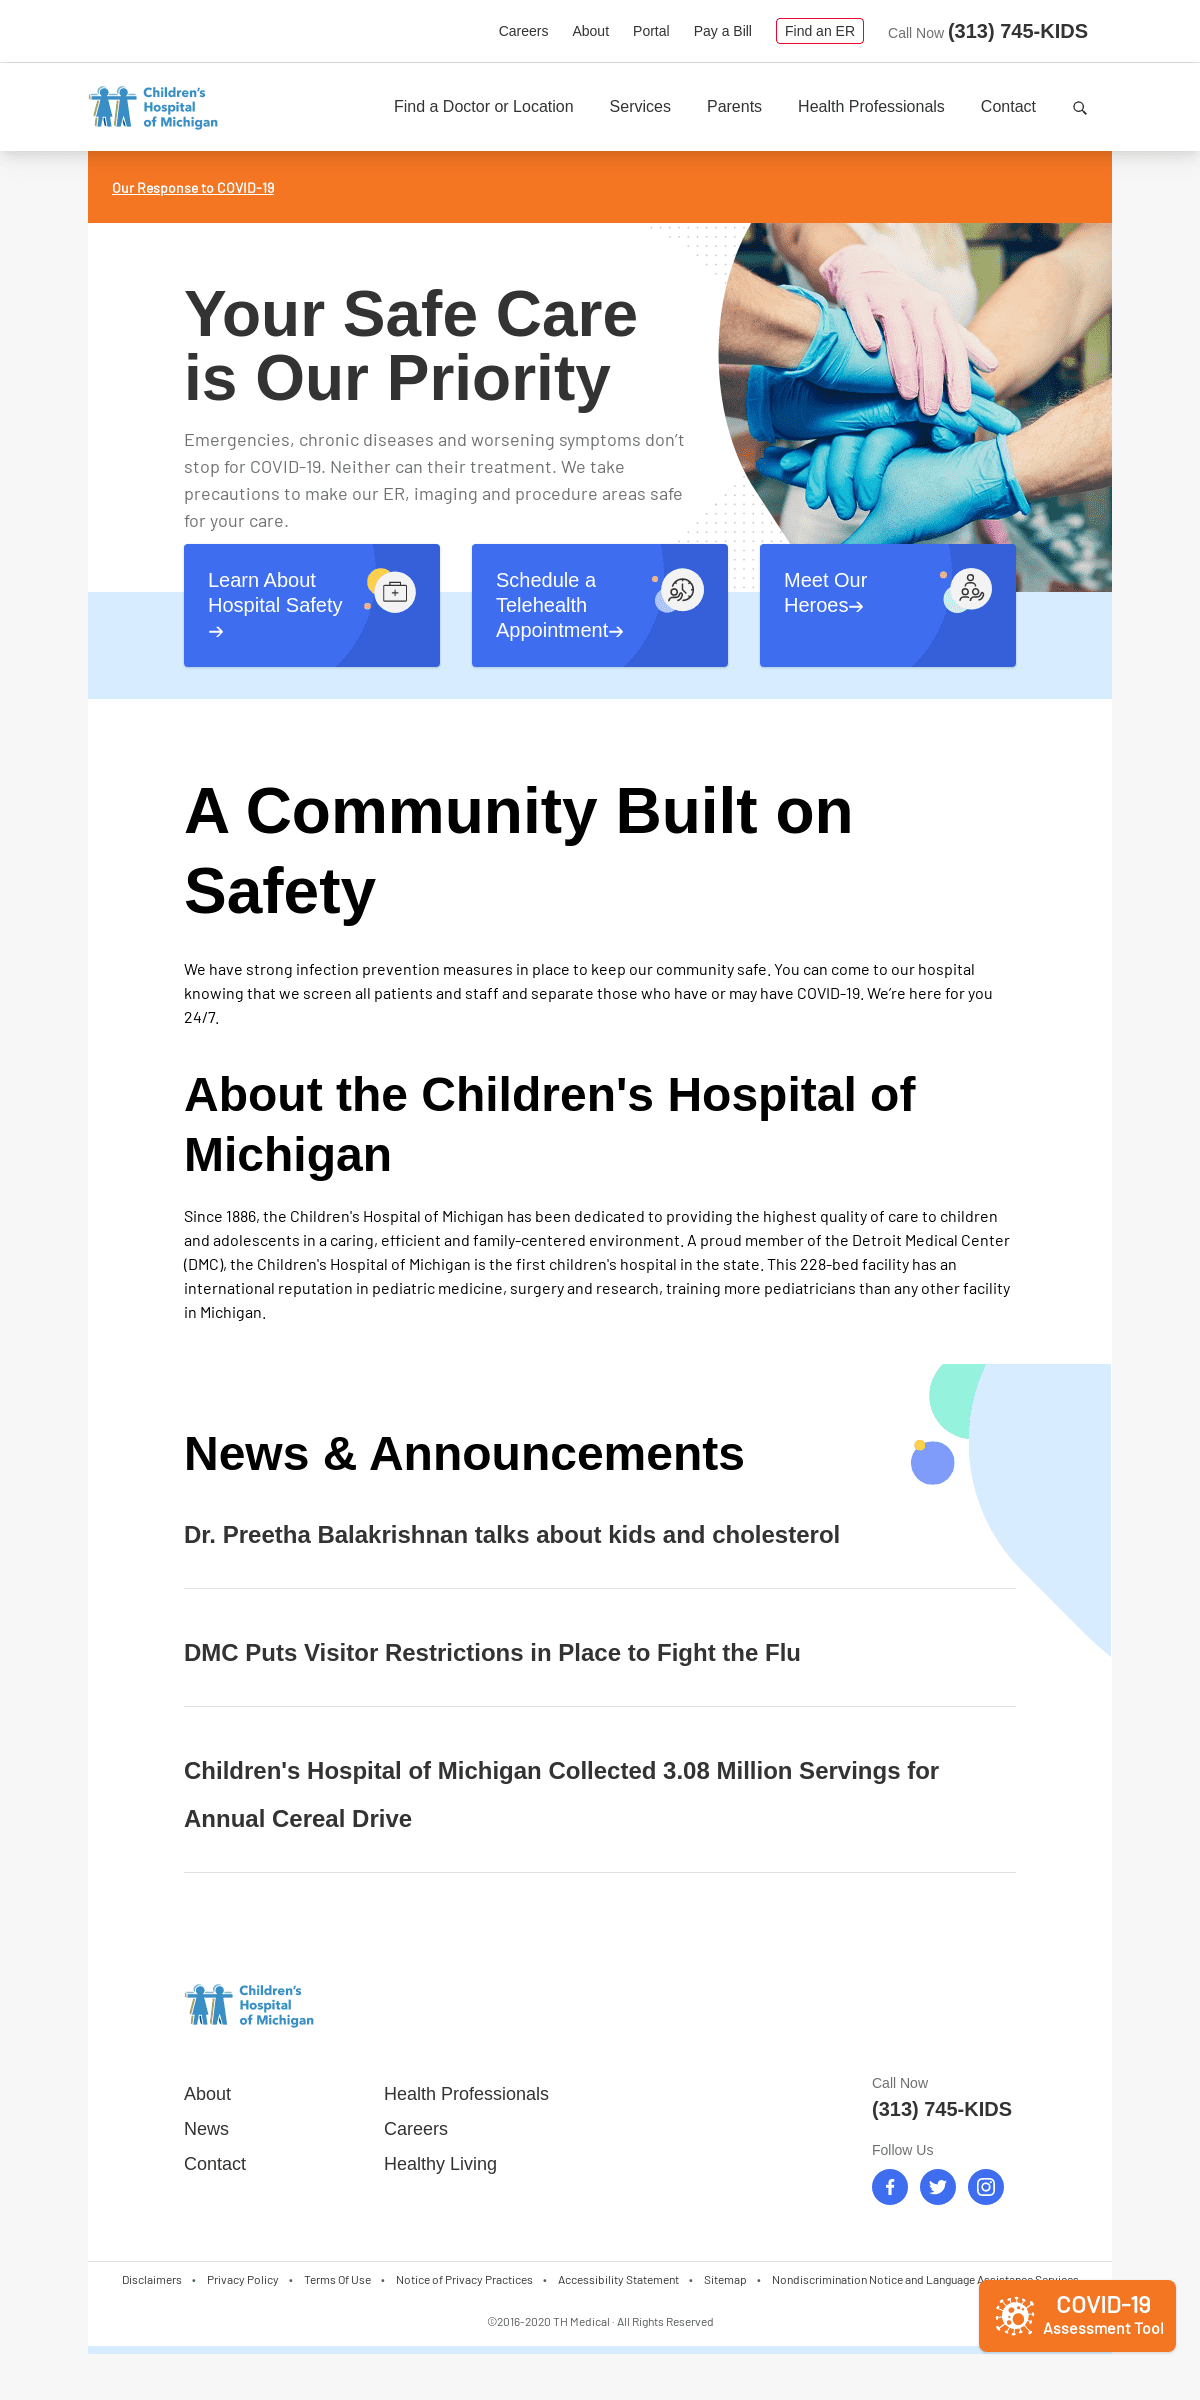 A complete backup of childrensdmc.org